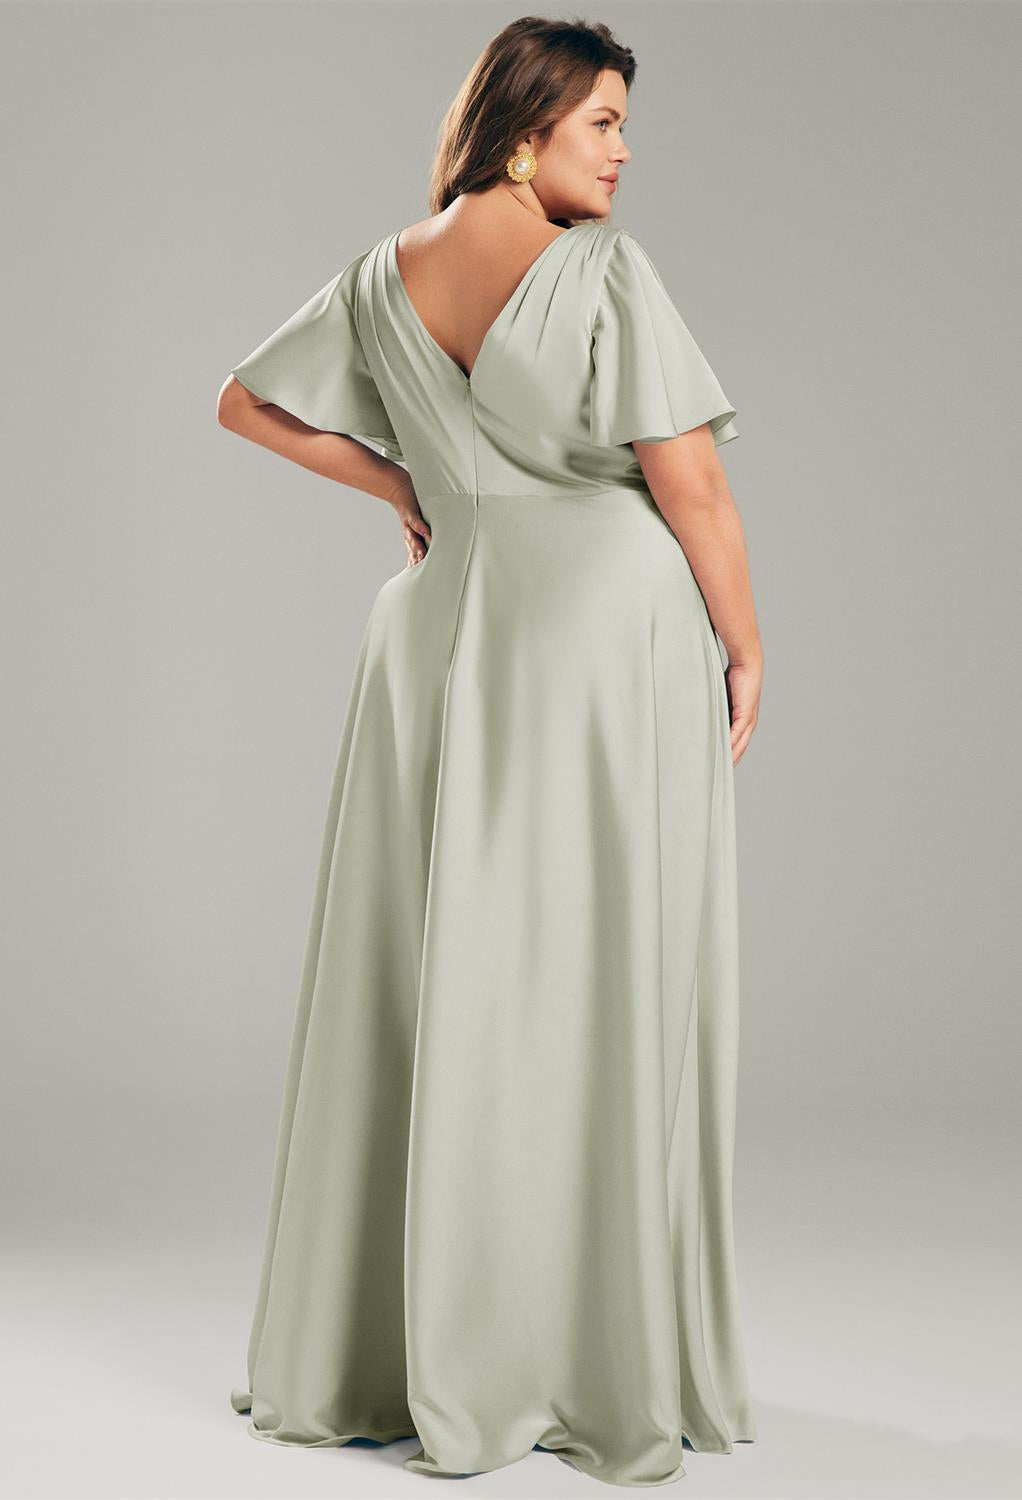 The back view of a Furst - Satin Charmeuse Bridesmaid Dress - Off The Rack in sage green available at Bergamot Bridal, a bridal shop in London.